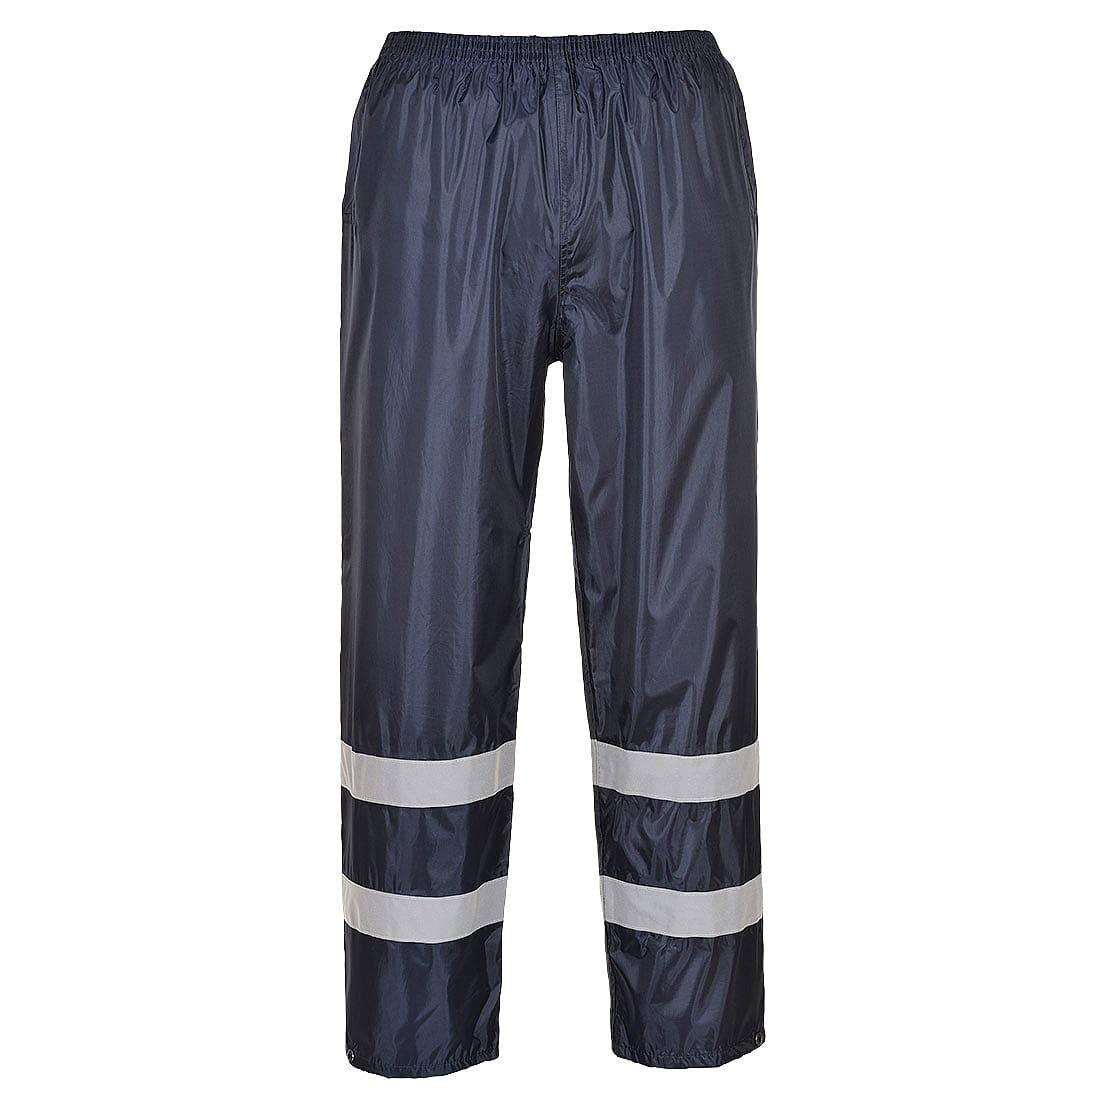 Portwest Classic Iona Rain Trousers in Navy (Product Code: F441)